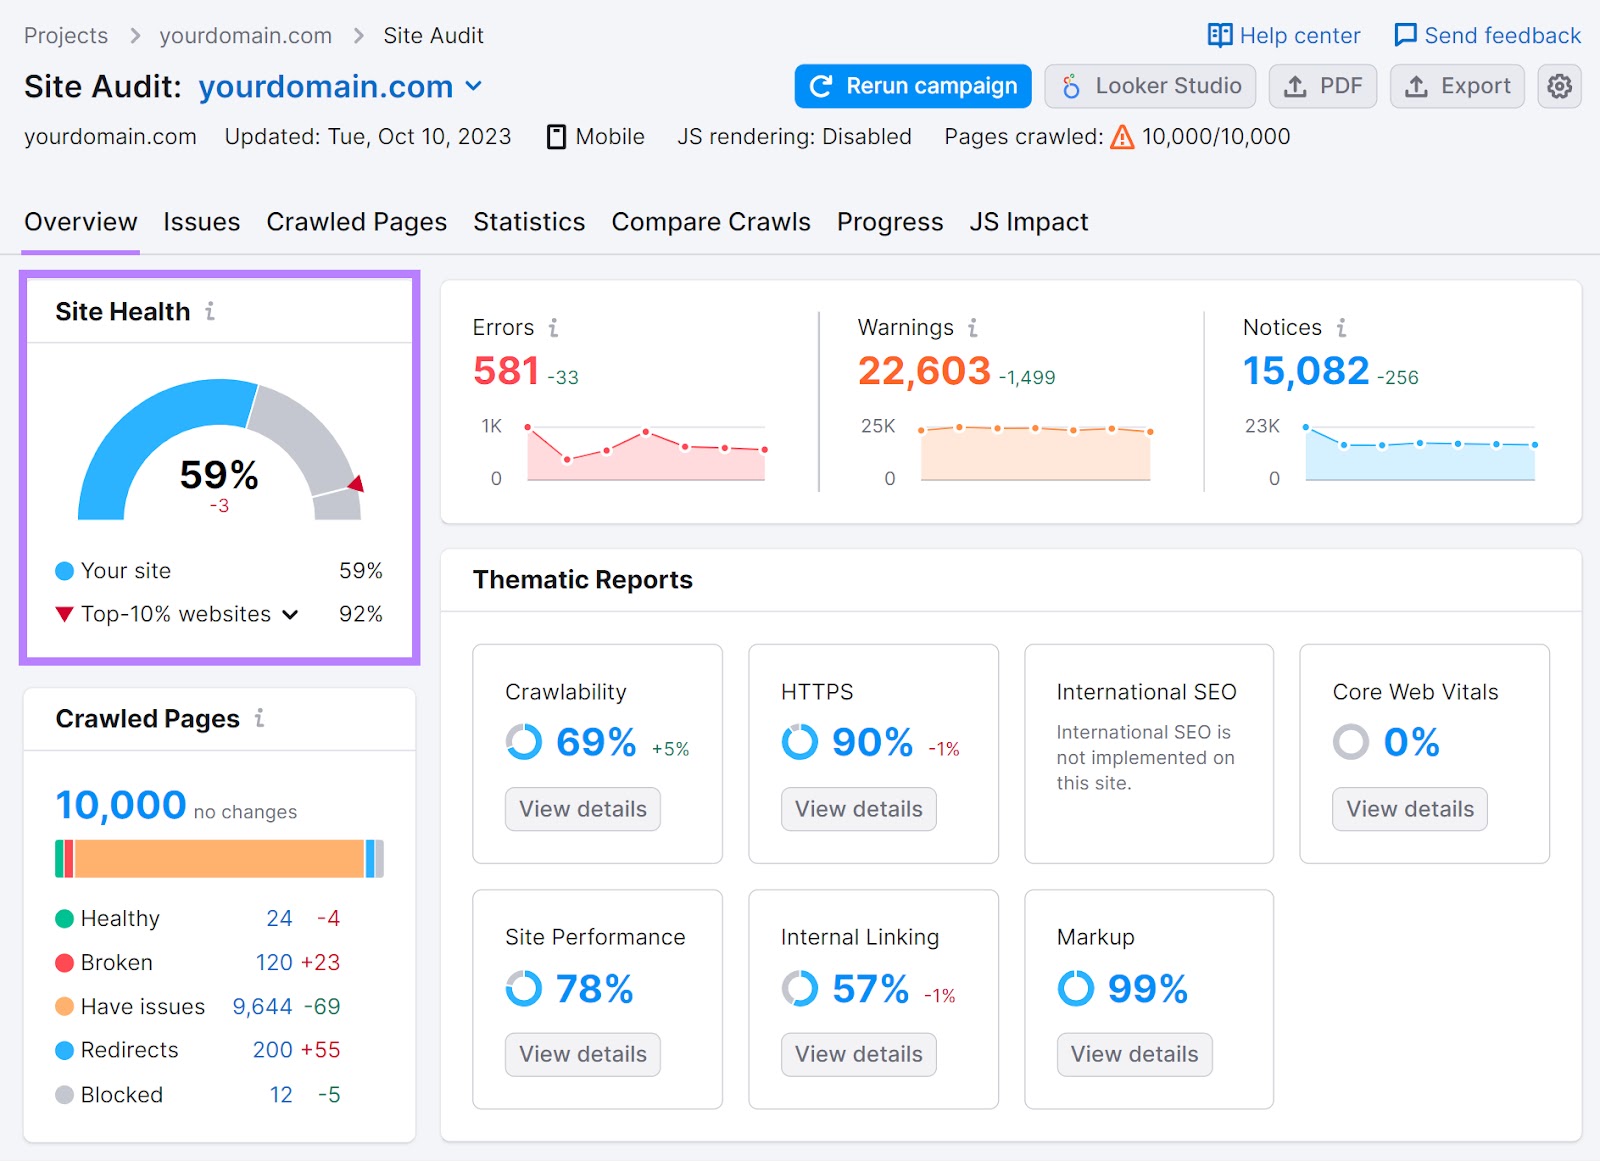 Site Audit overview dashboard with "Site Health" widget highlighted